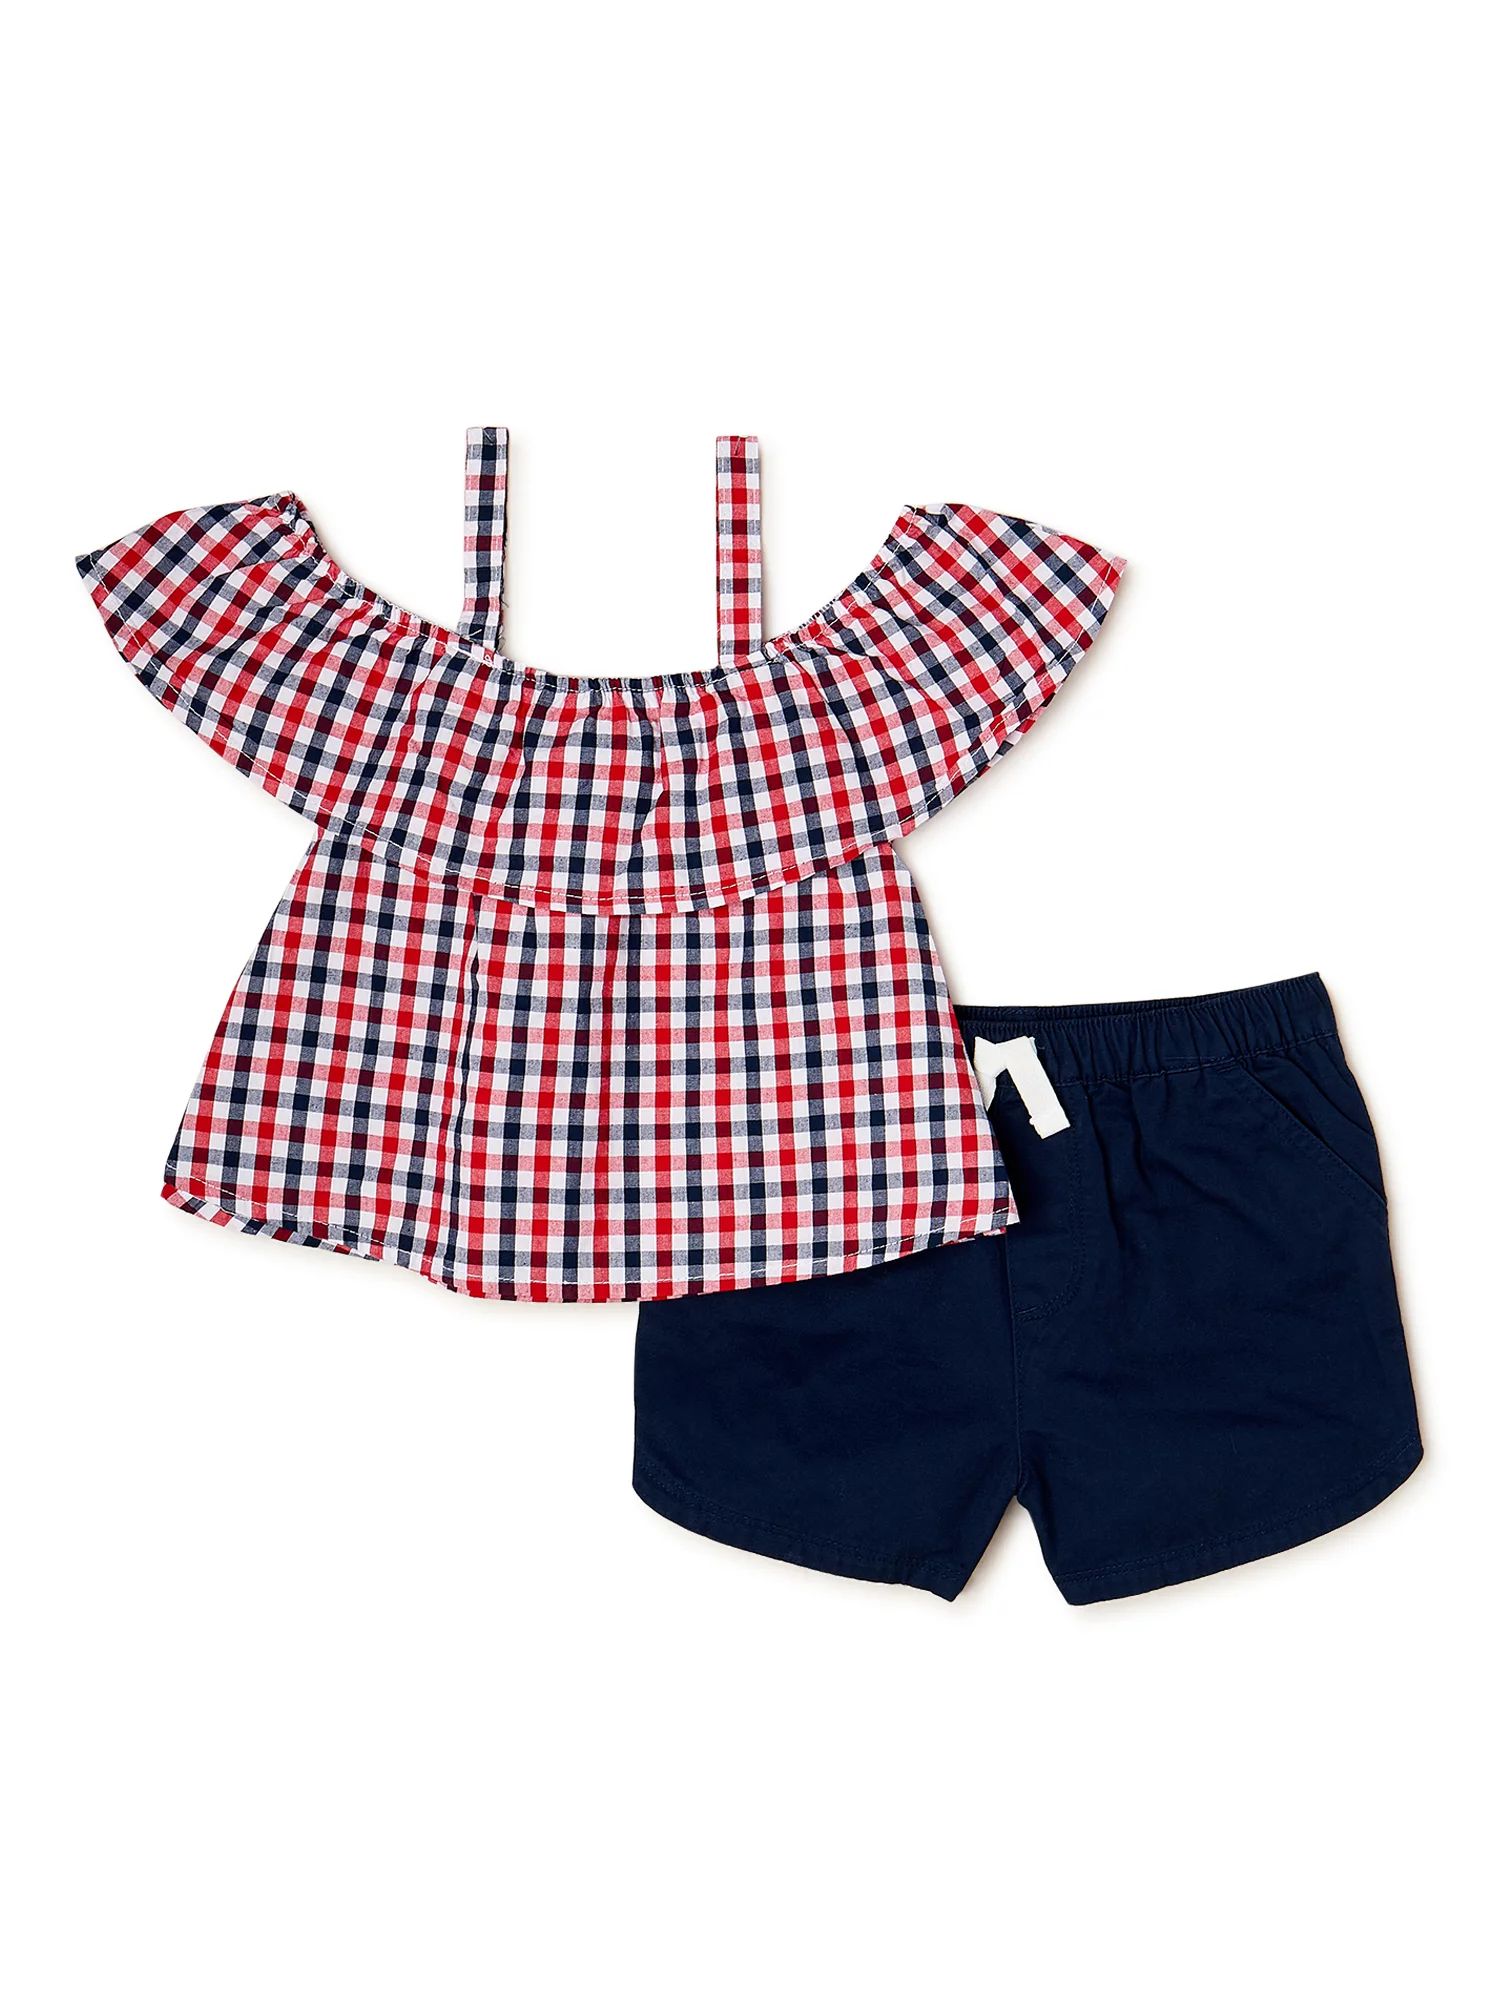 Americana Baby & Toddler Girls Flutter Top & Shorts, 2-Piece Outfit Set, Sizes 12M-5T | Walmart (US)